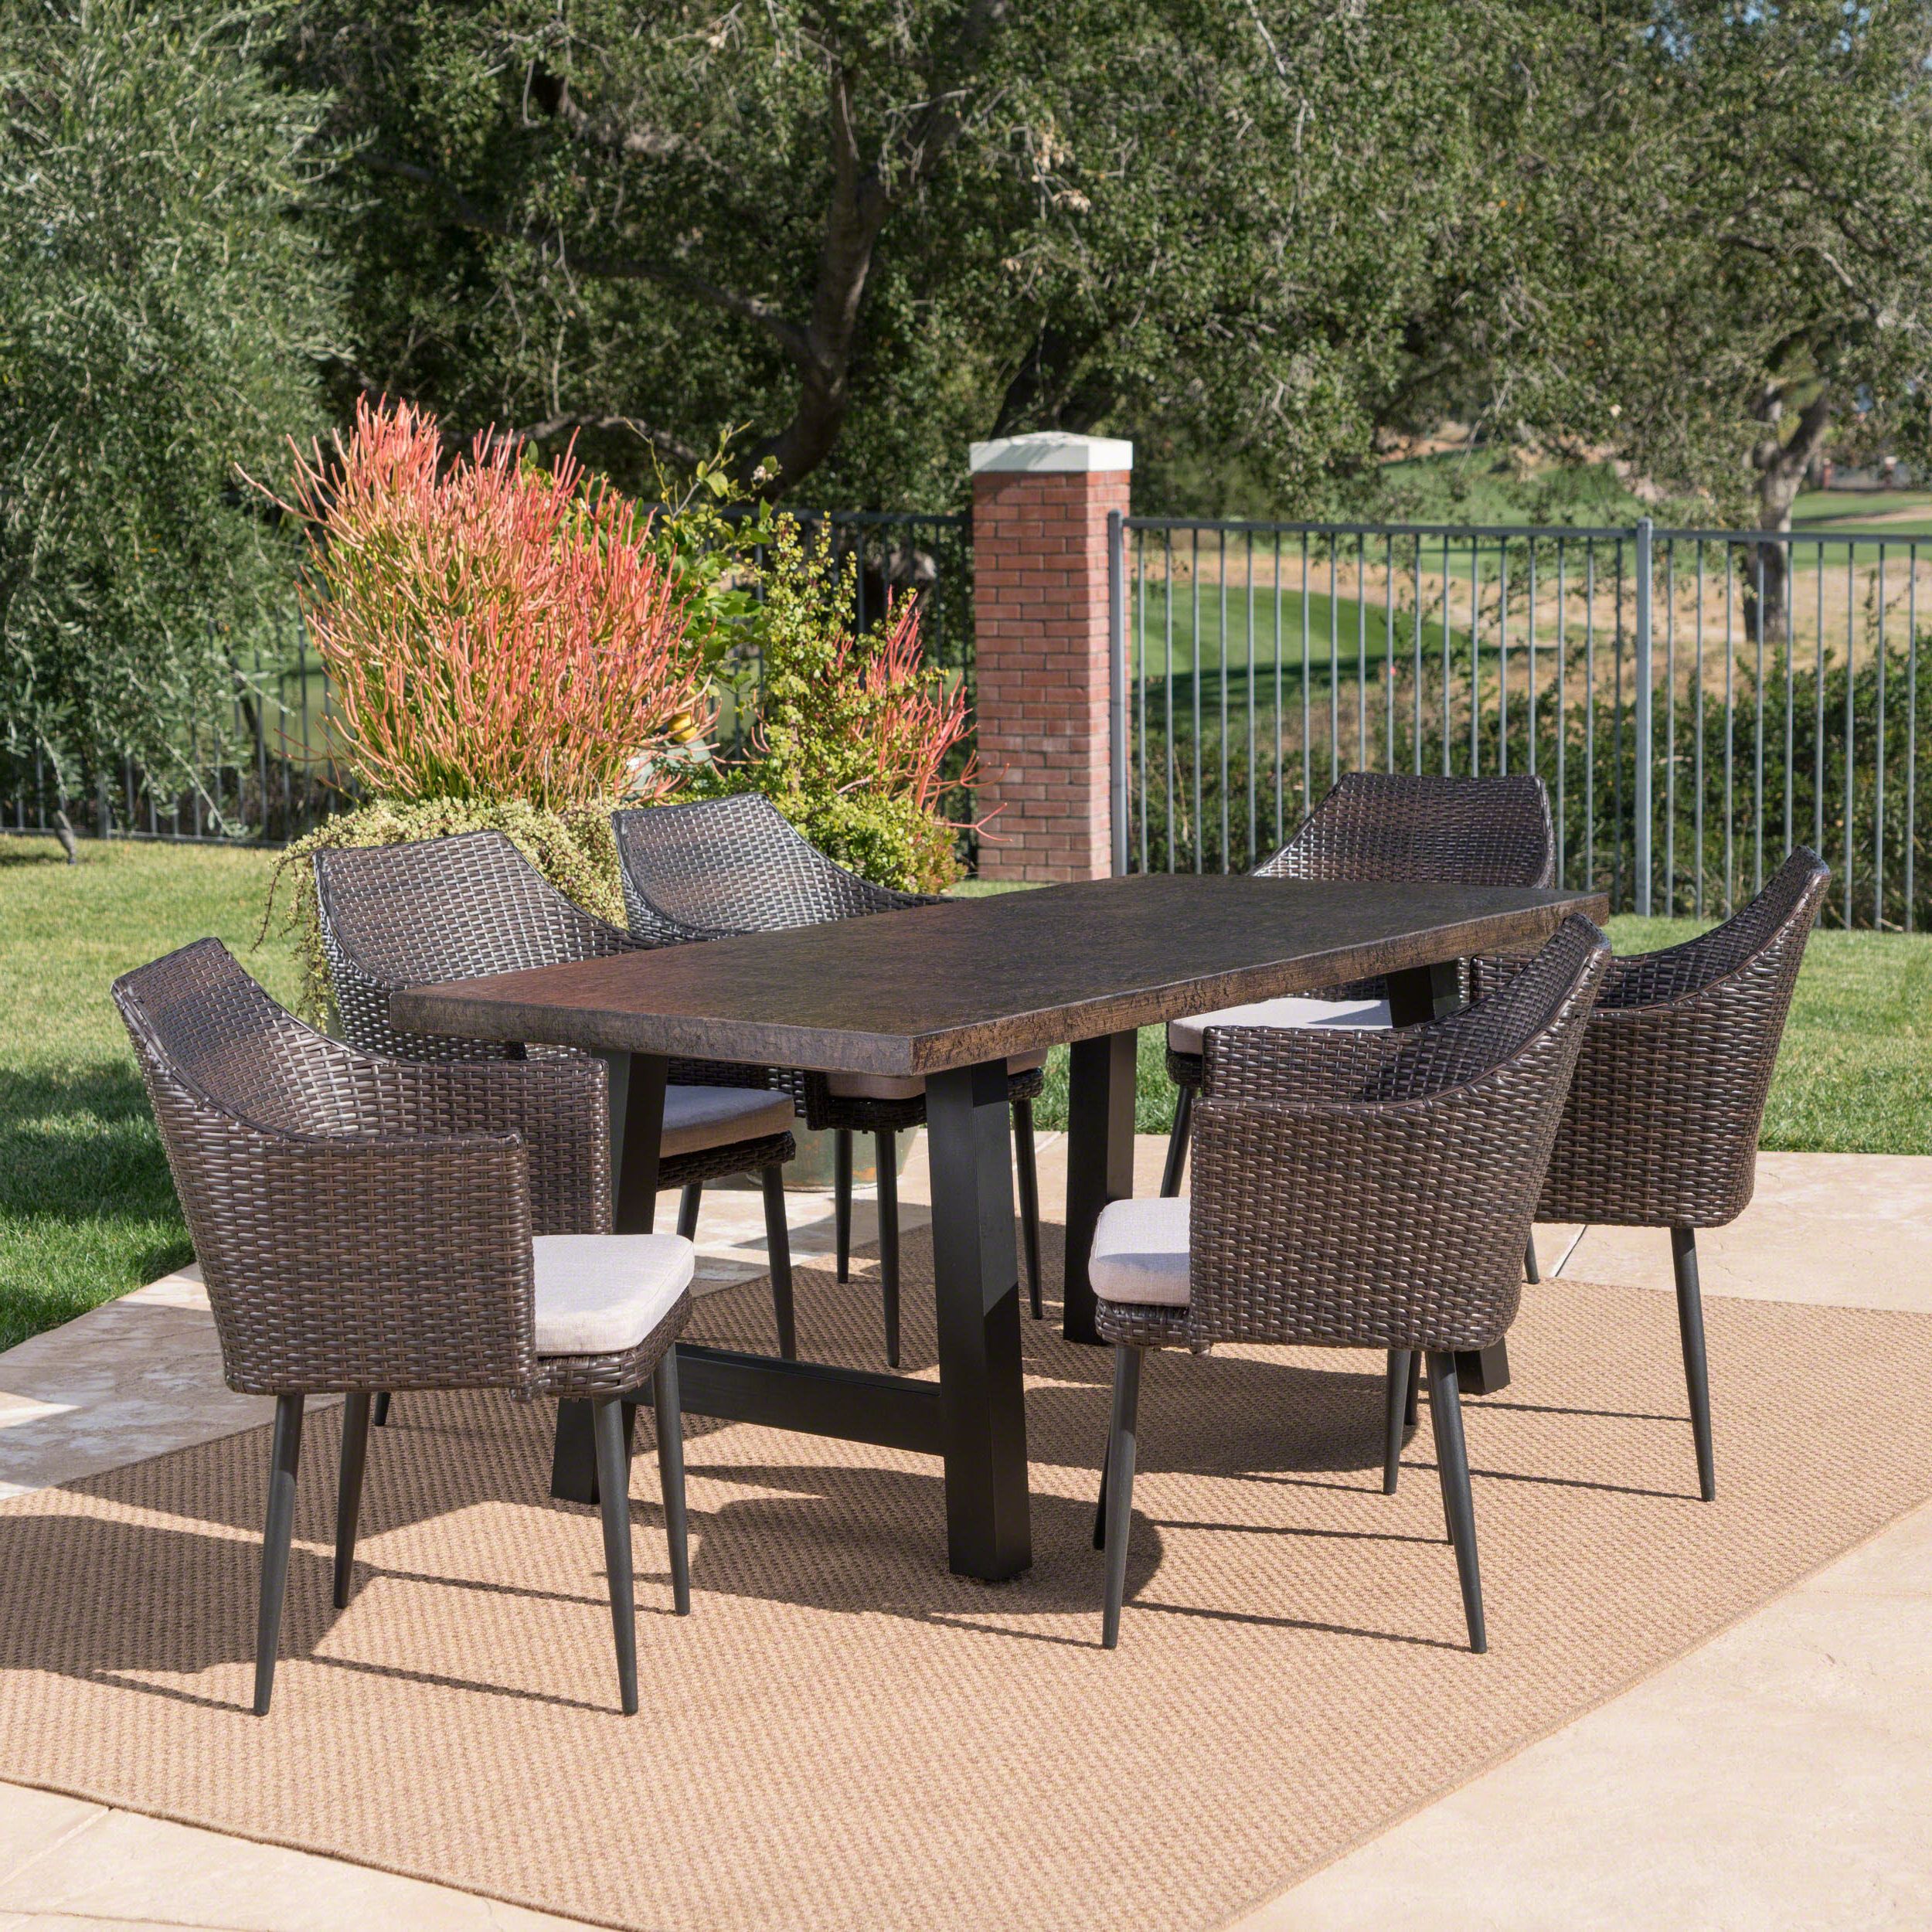 Fashionable Rattan Wicker Outdoor Seating Sets Regarding Porter Outdoor 7 Piece Wicker Dining Set With Light Weight Concrete (View 11 of 15)